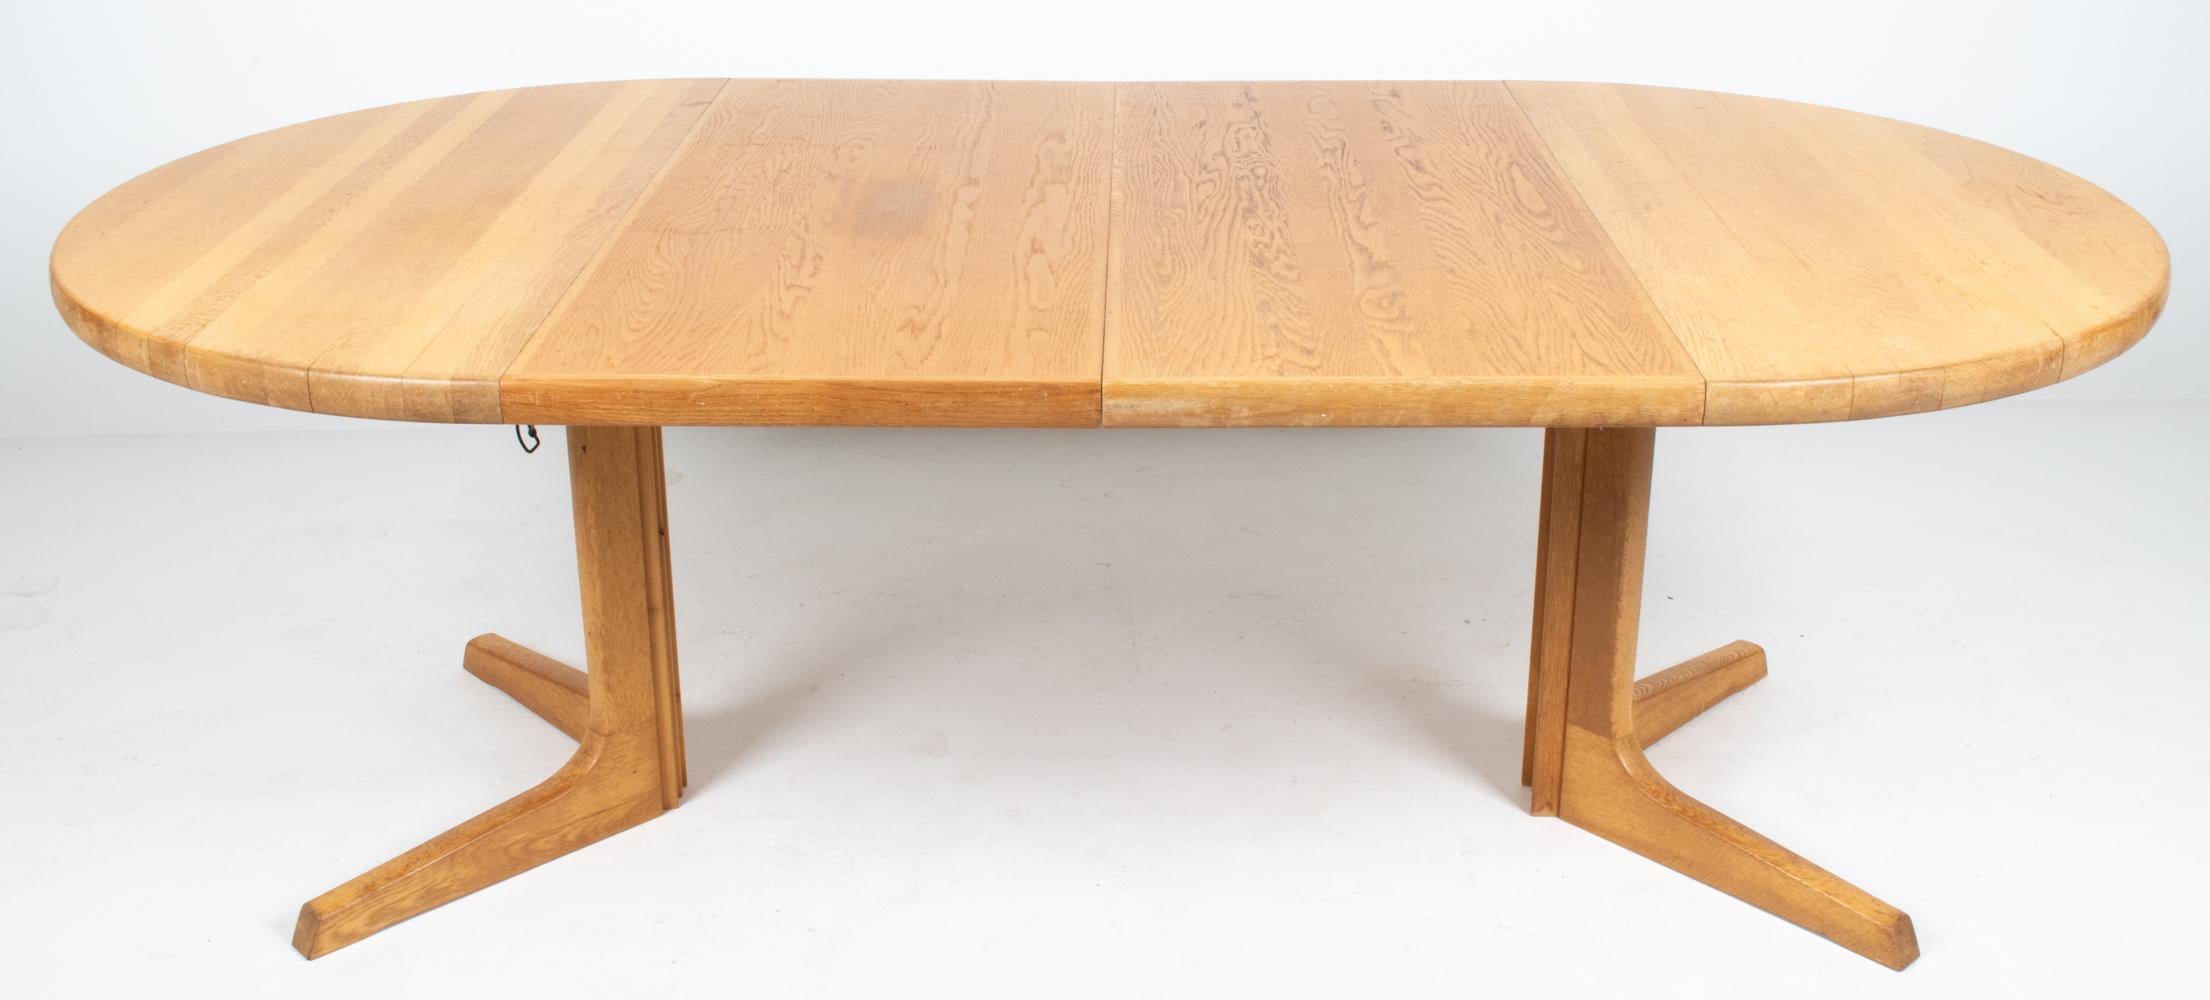 Oak Mid-Century Modern Extendable Dining Room Table by Niels Otto Møller, 1970s For Sale 10